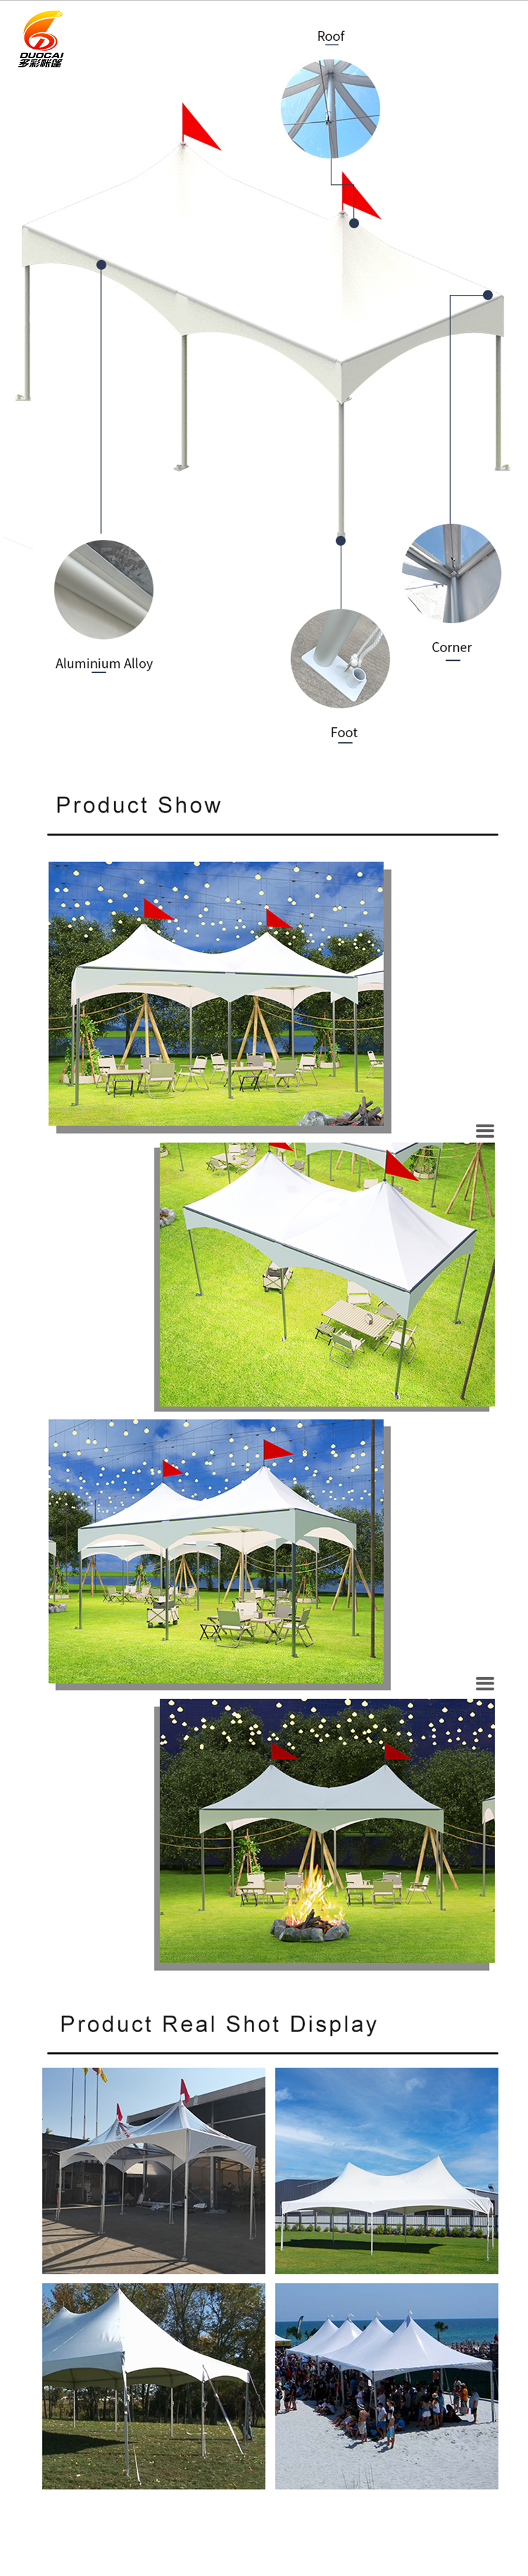 A waterproof and UV resistant double peak tent with large capacity and convenient installation